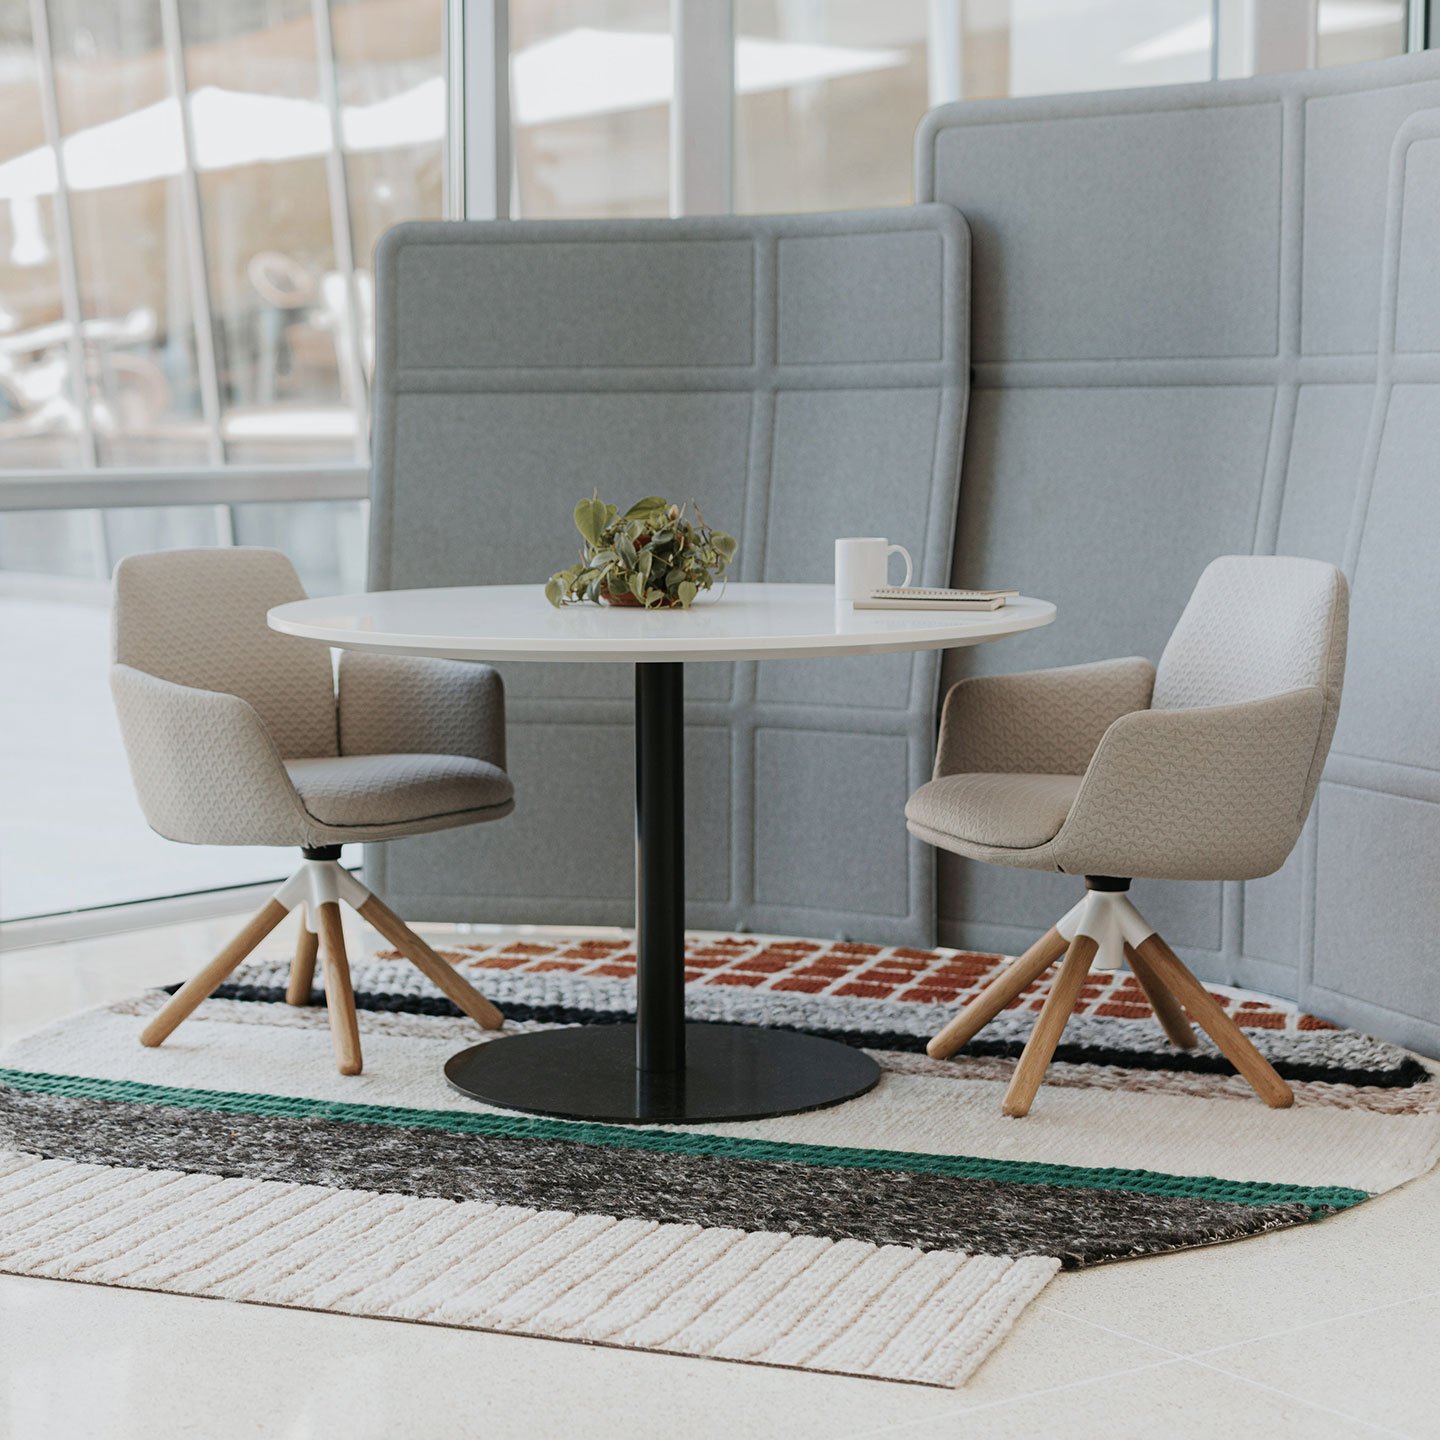 Haworth Mangas Original Rug in multiple colors and circular shape under white table and grey chairs with haworth privacy booth in grey in open office space